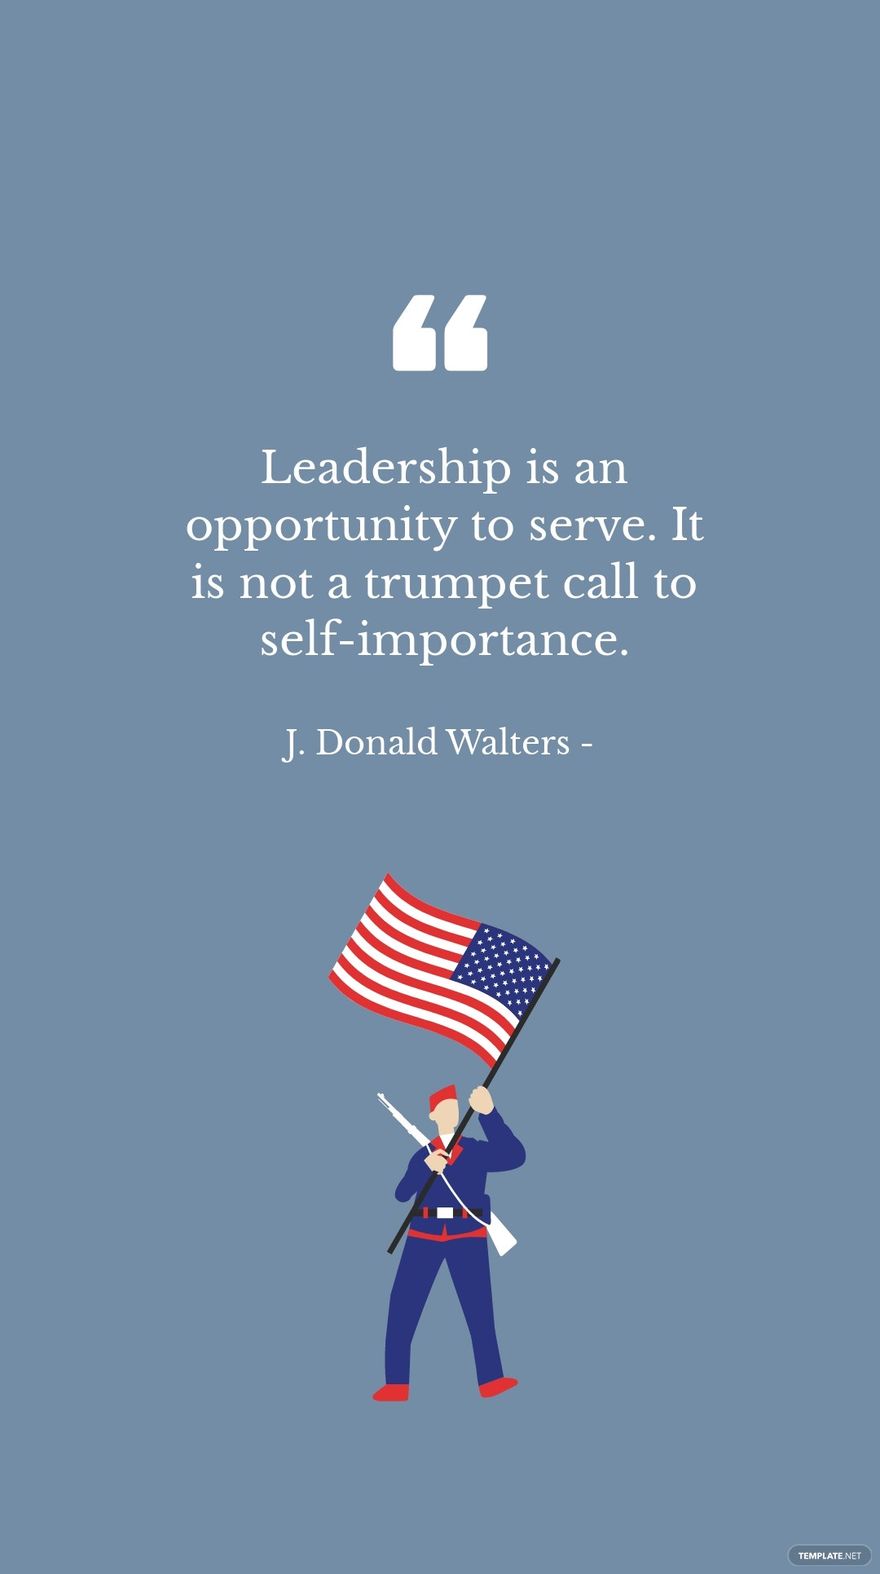 Free J. Donald Walters - Leadership is an opportunity to serve. It is not a trumpet call to self-importance.